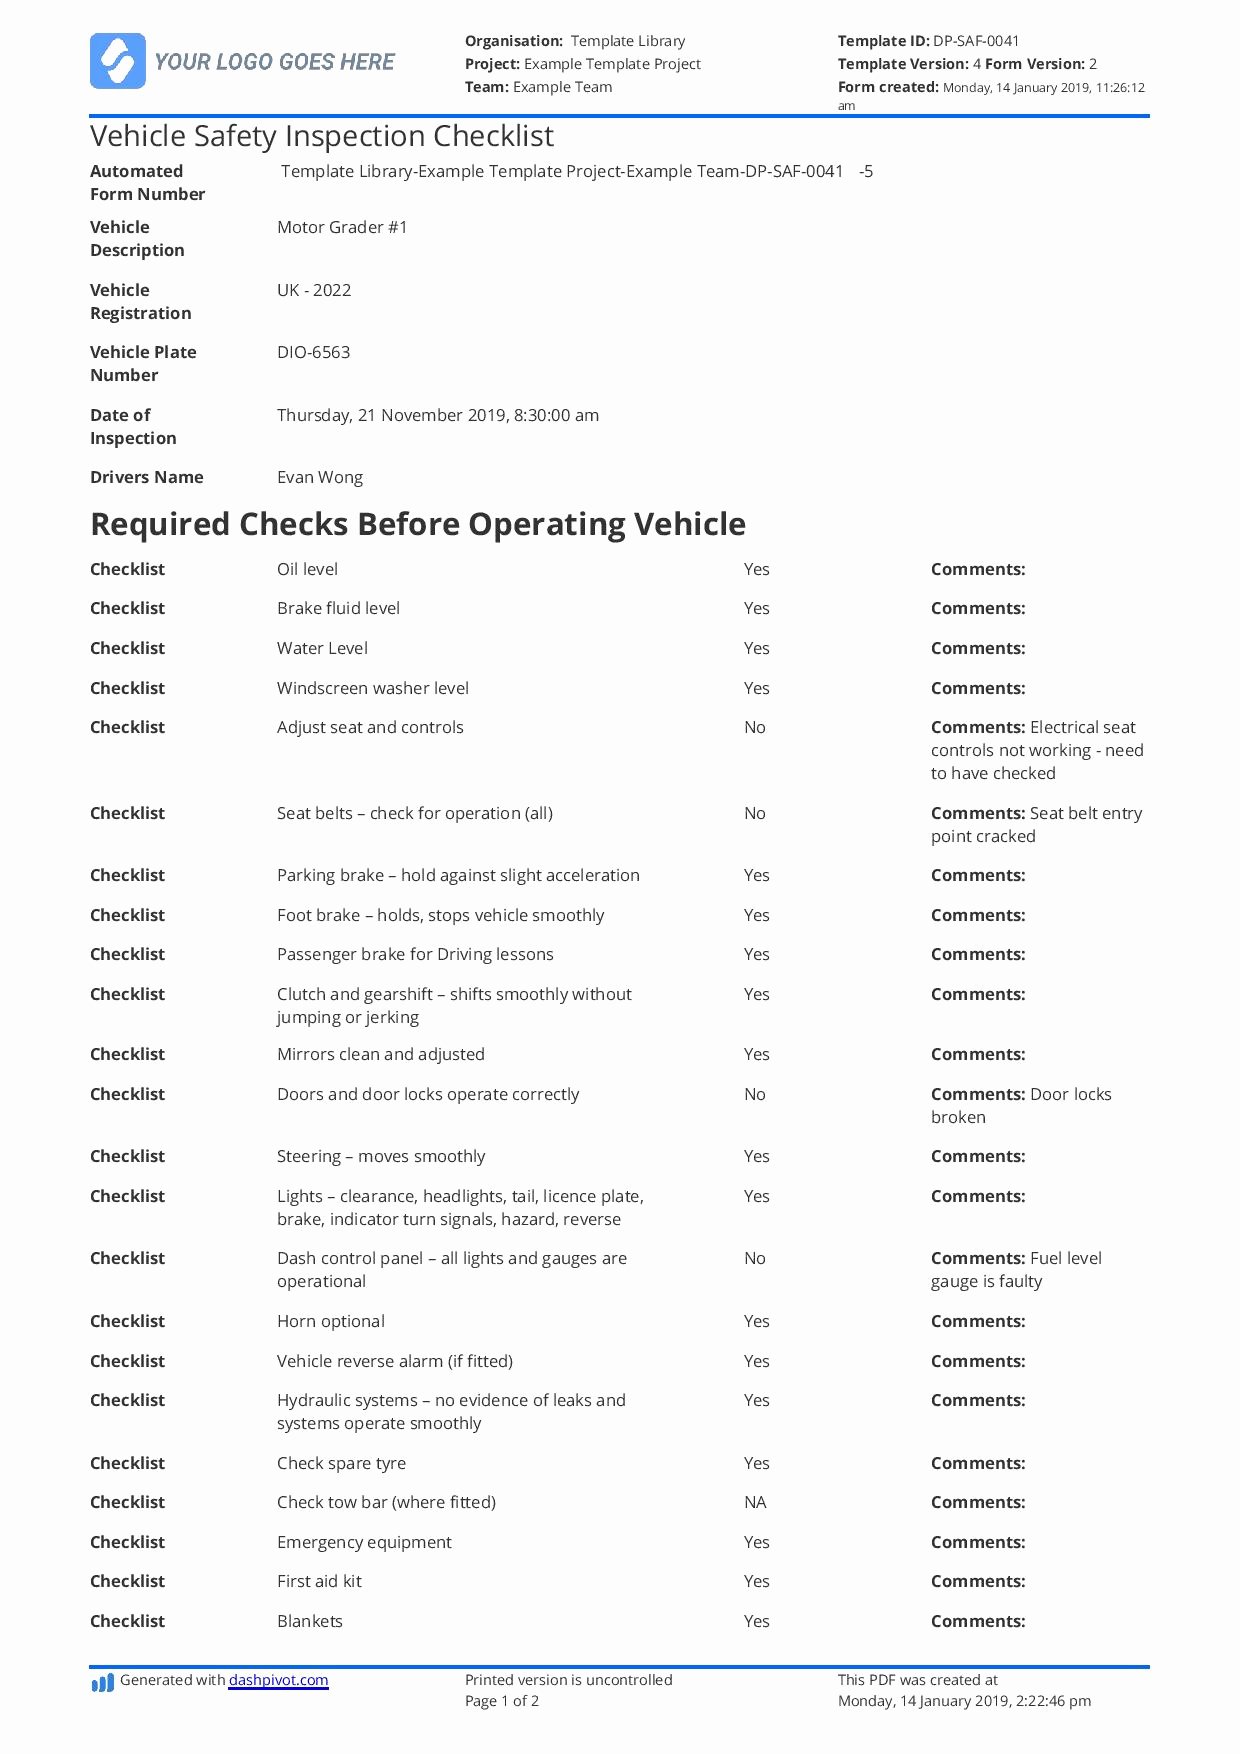 Car Inspection Checklist Template New Vehicle Safety Inspection Checklist Template Free and